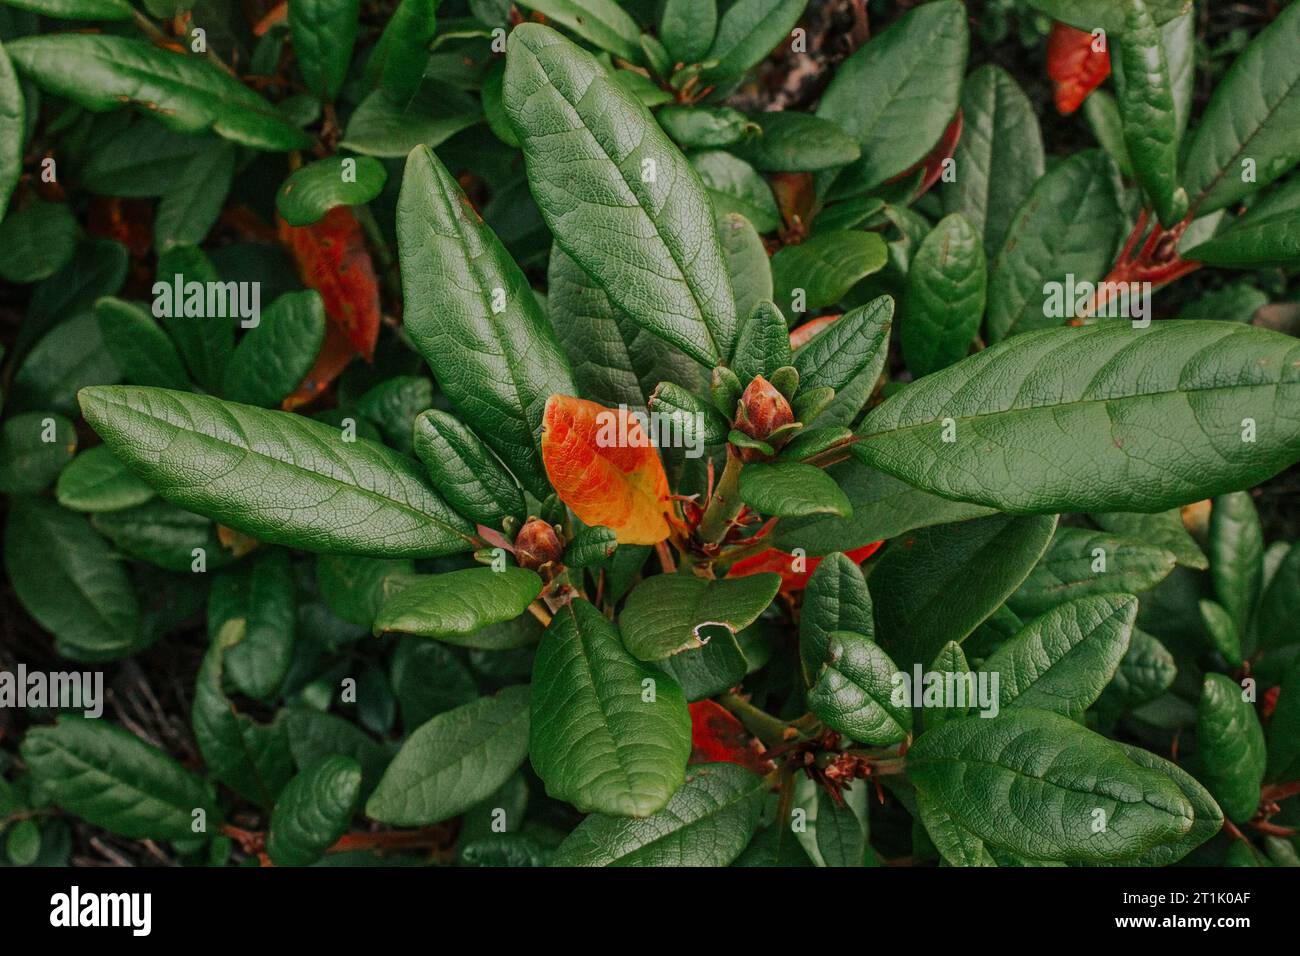 Heather evergreen shrub Rhododendron. Botanical background. Green and orange large leaves of the plant. Stock Photo